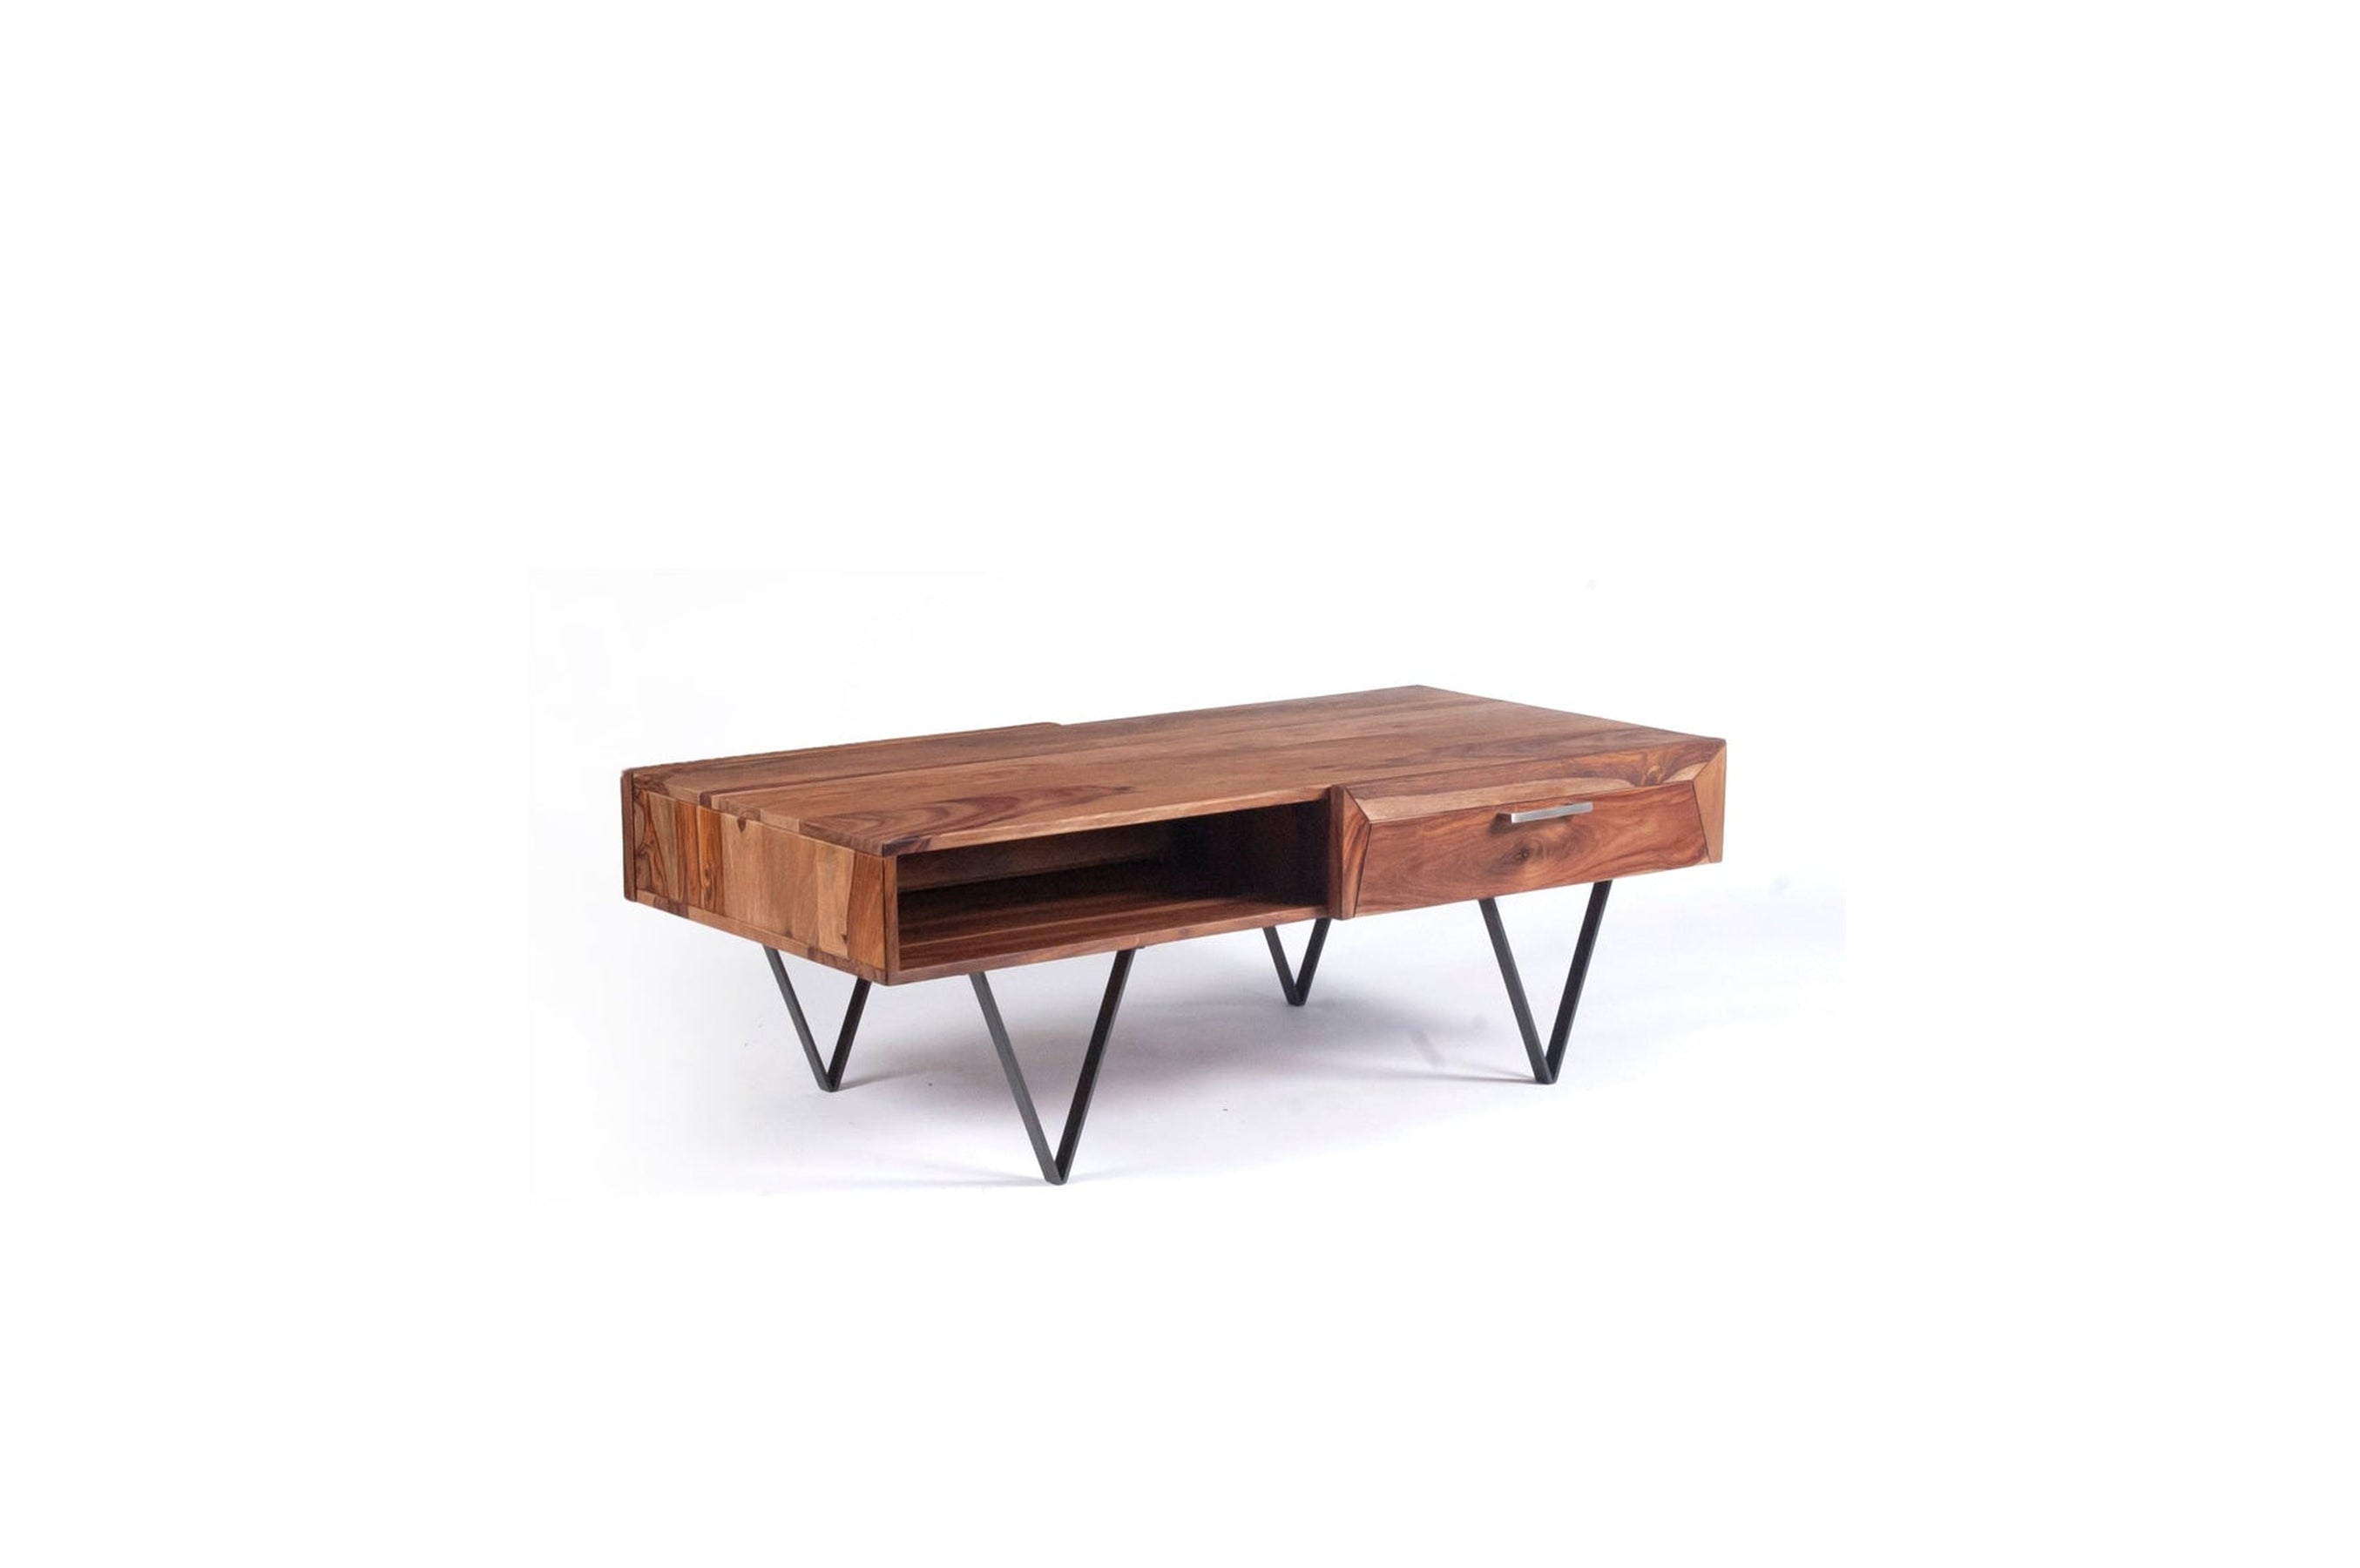 Metric Coffee Table with Drawers | Sofa Table with Storage | Wood Centre Table - Living Room or Office |  45x24x16 inches